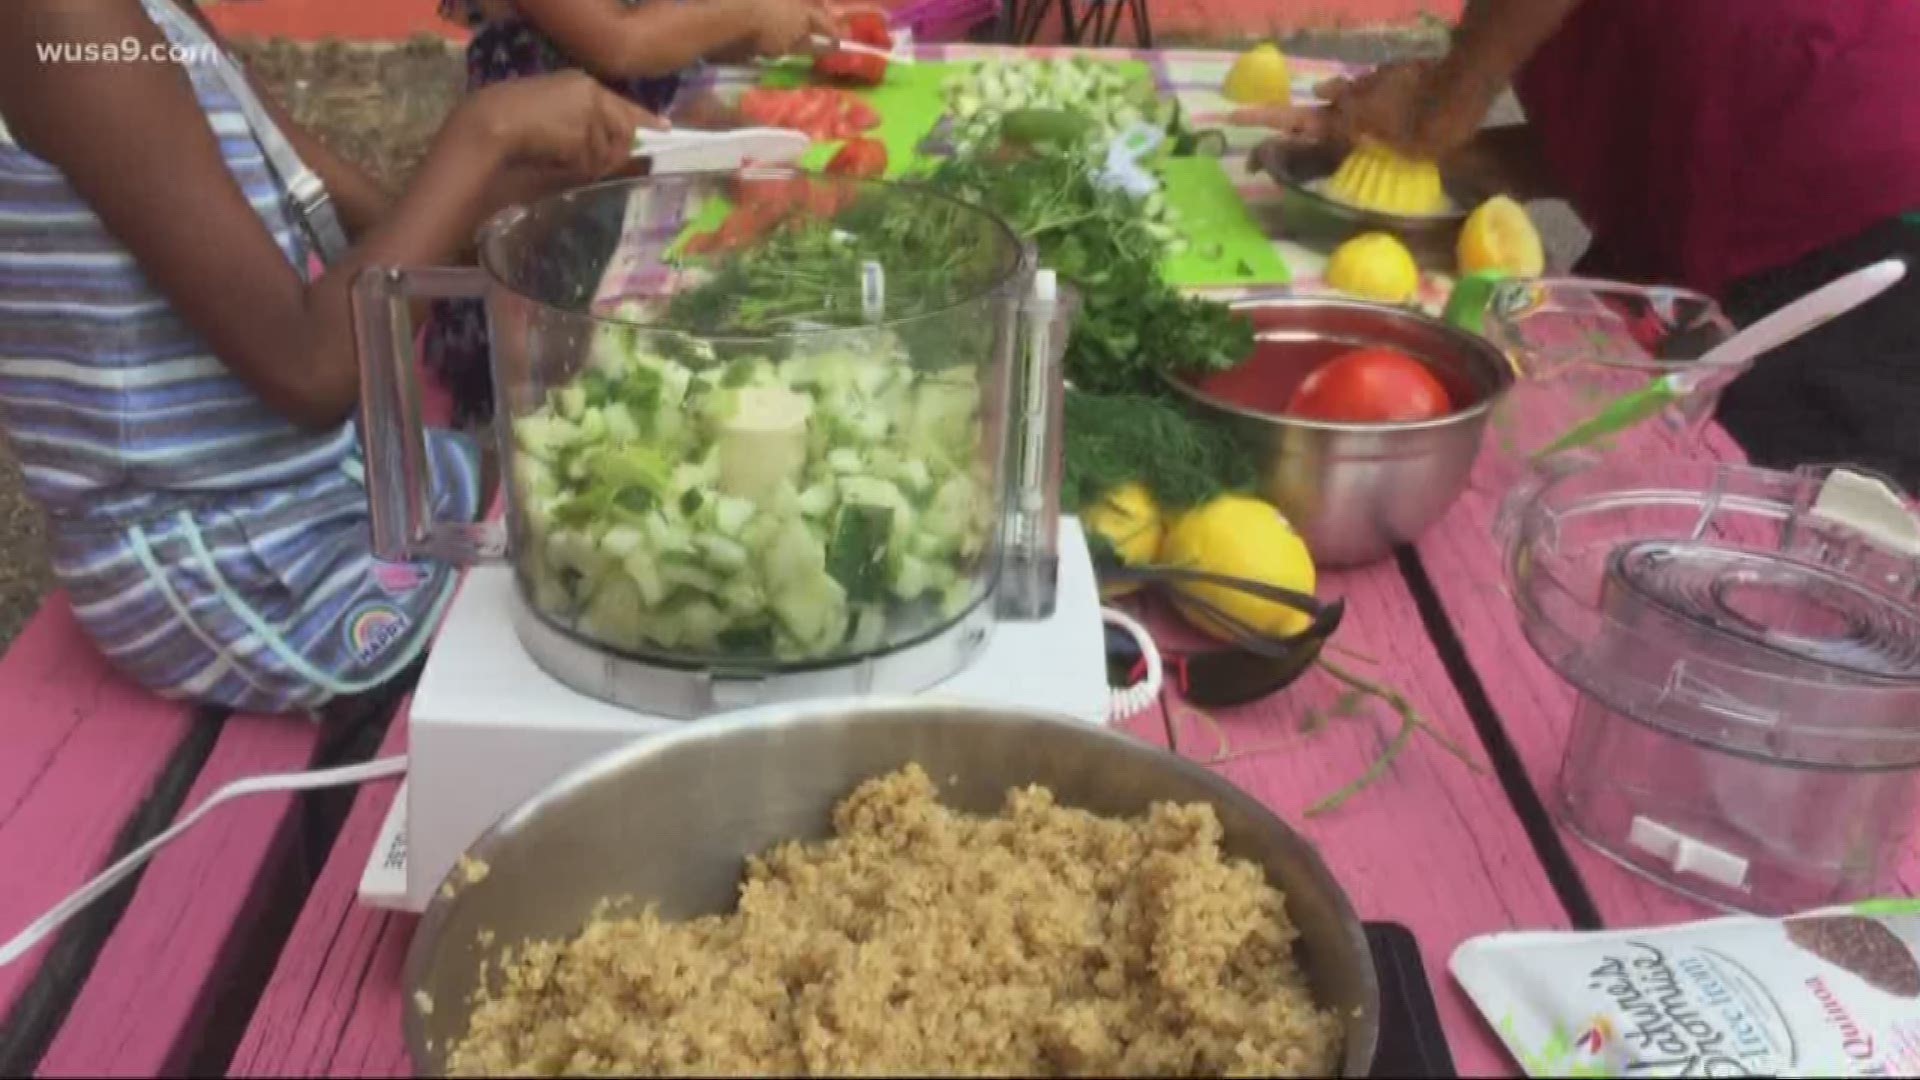 The Thursday farmshare is an offshoot of a school program teaching kids how to pick, cook and eat healthy vegetables.